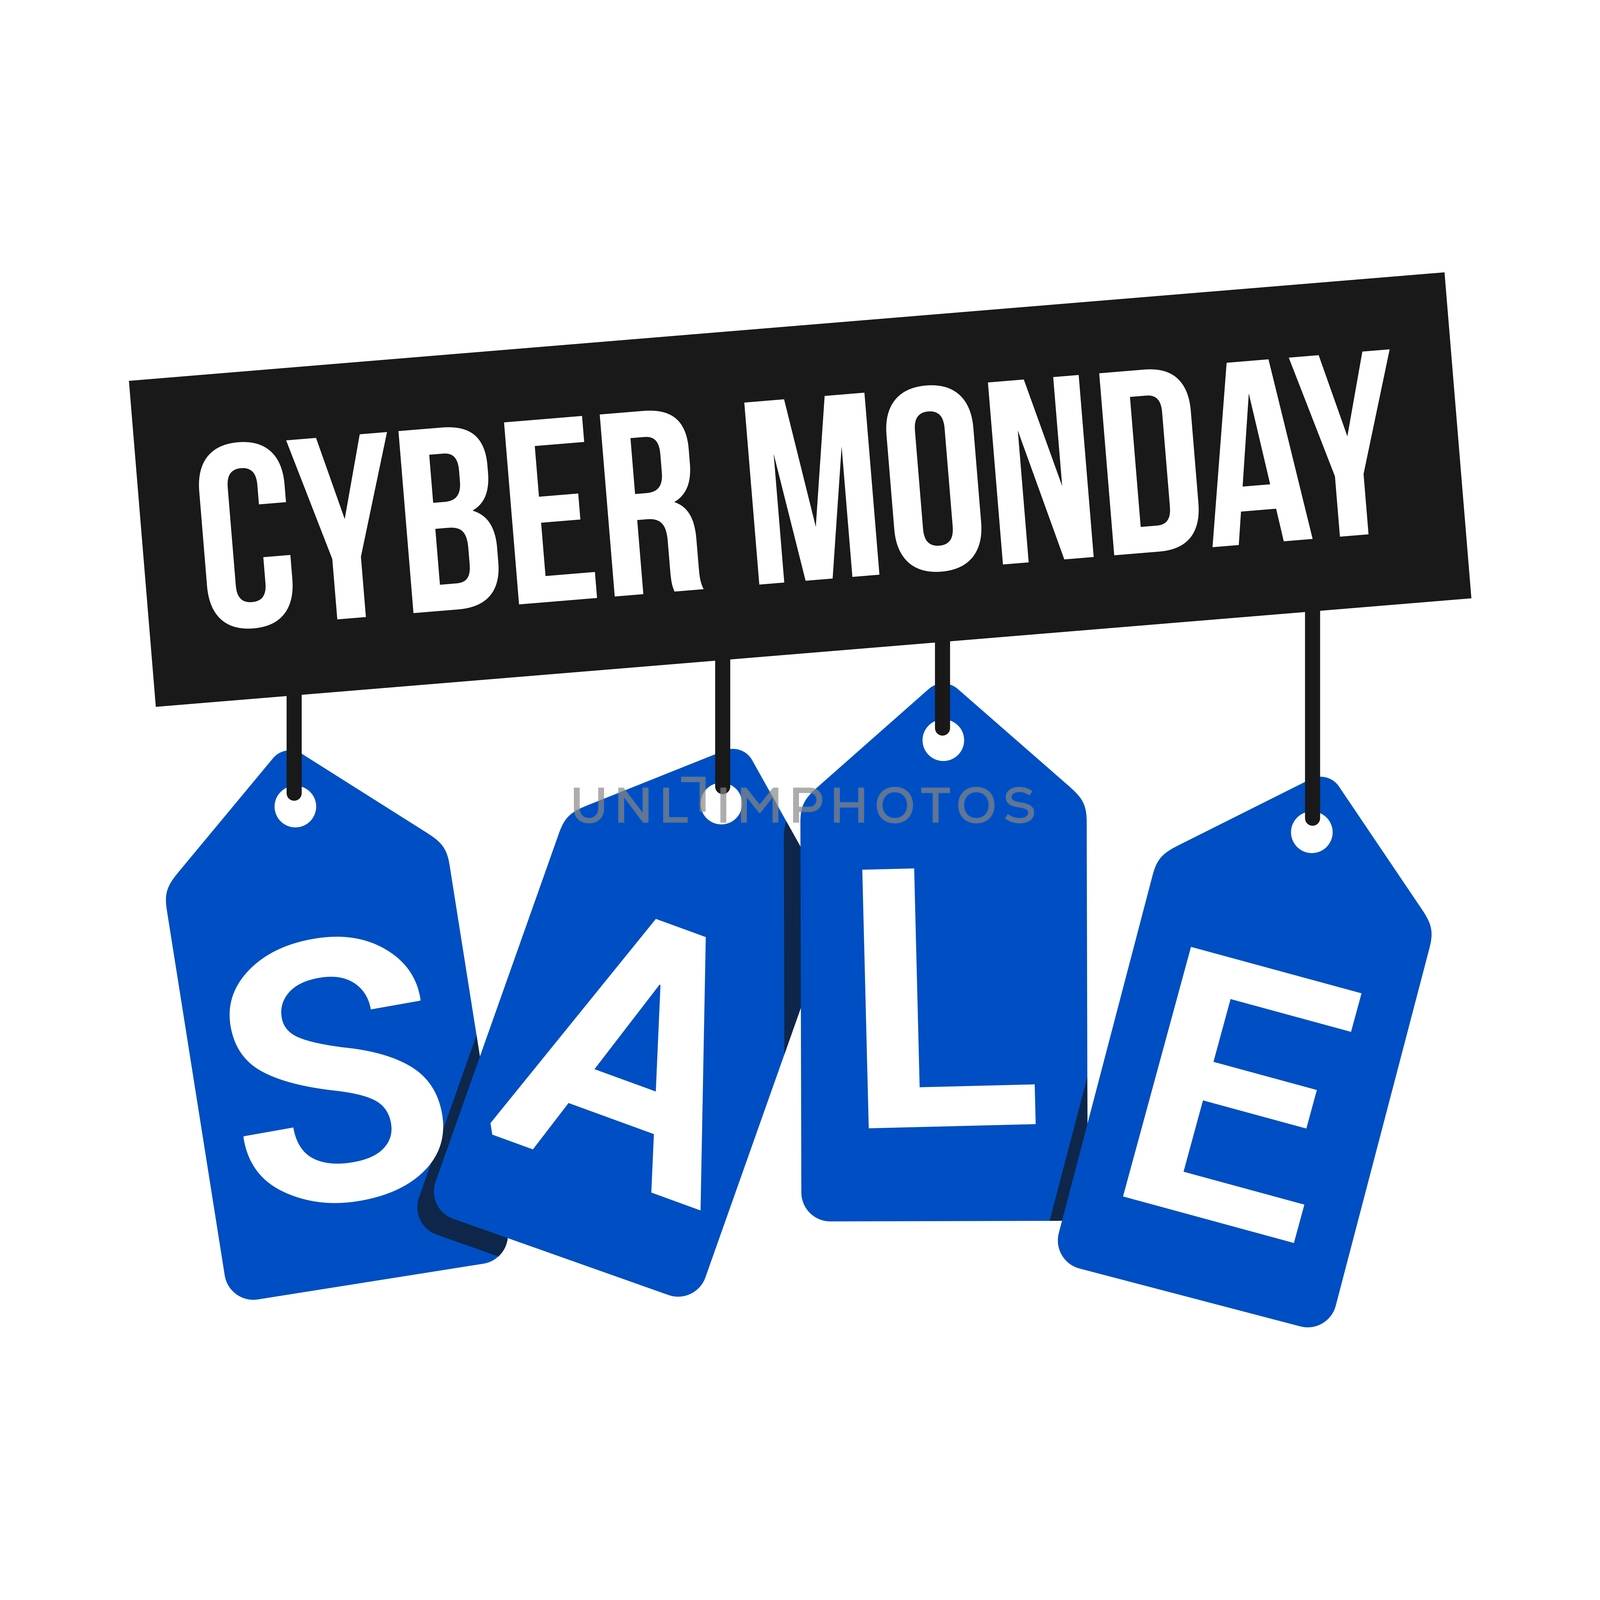 Cyber Monday Signage vector template illustration design EPS 10 by soponyono1